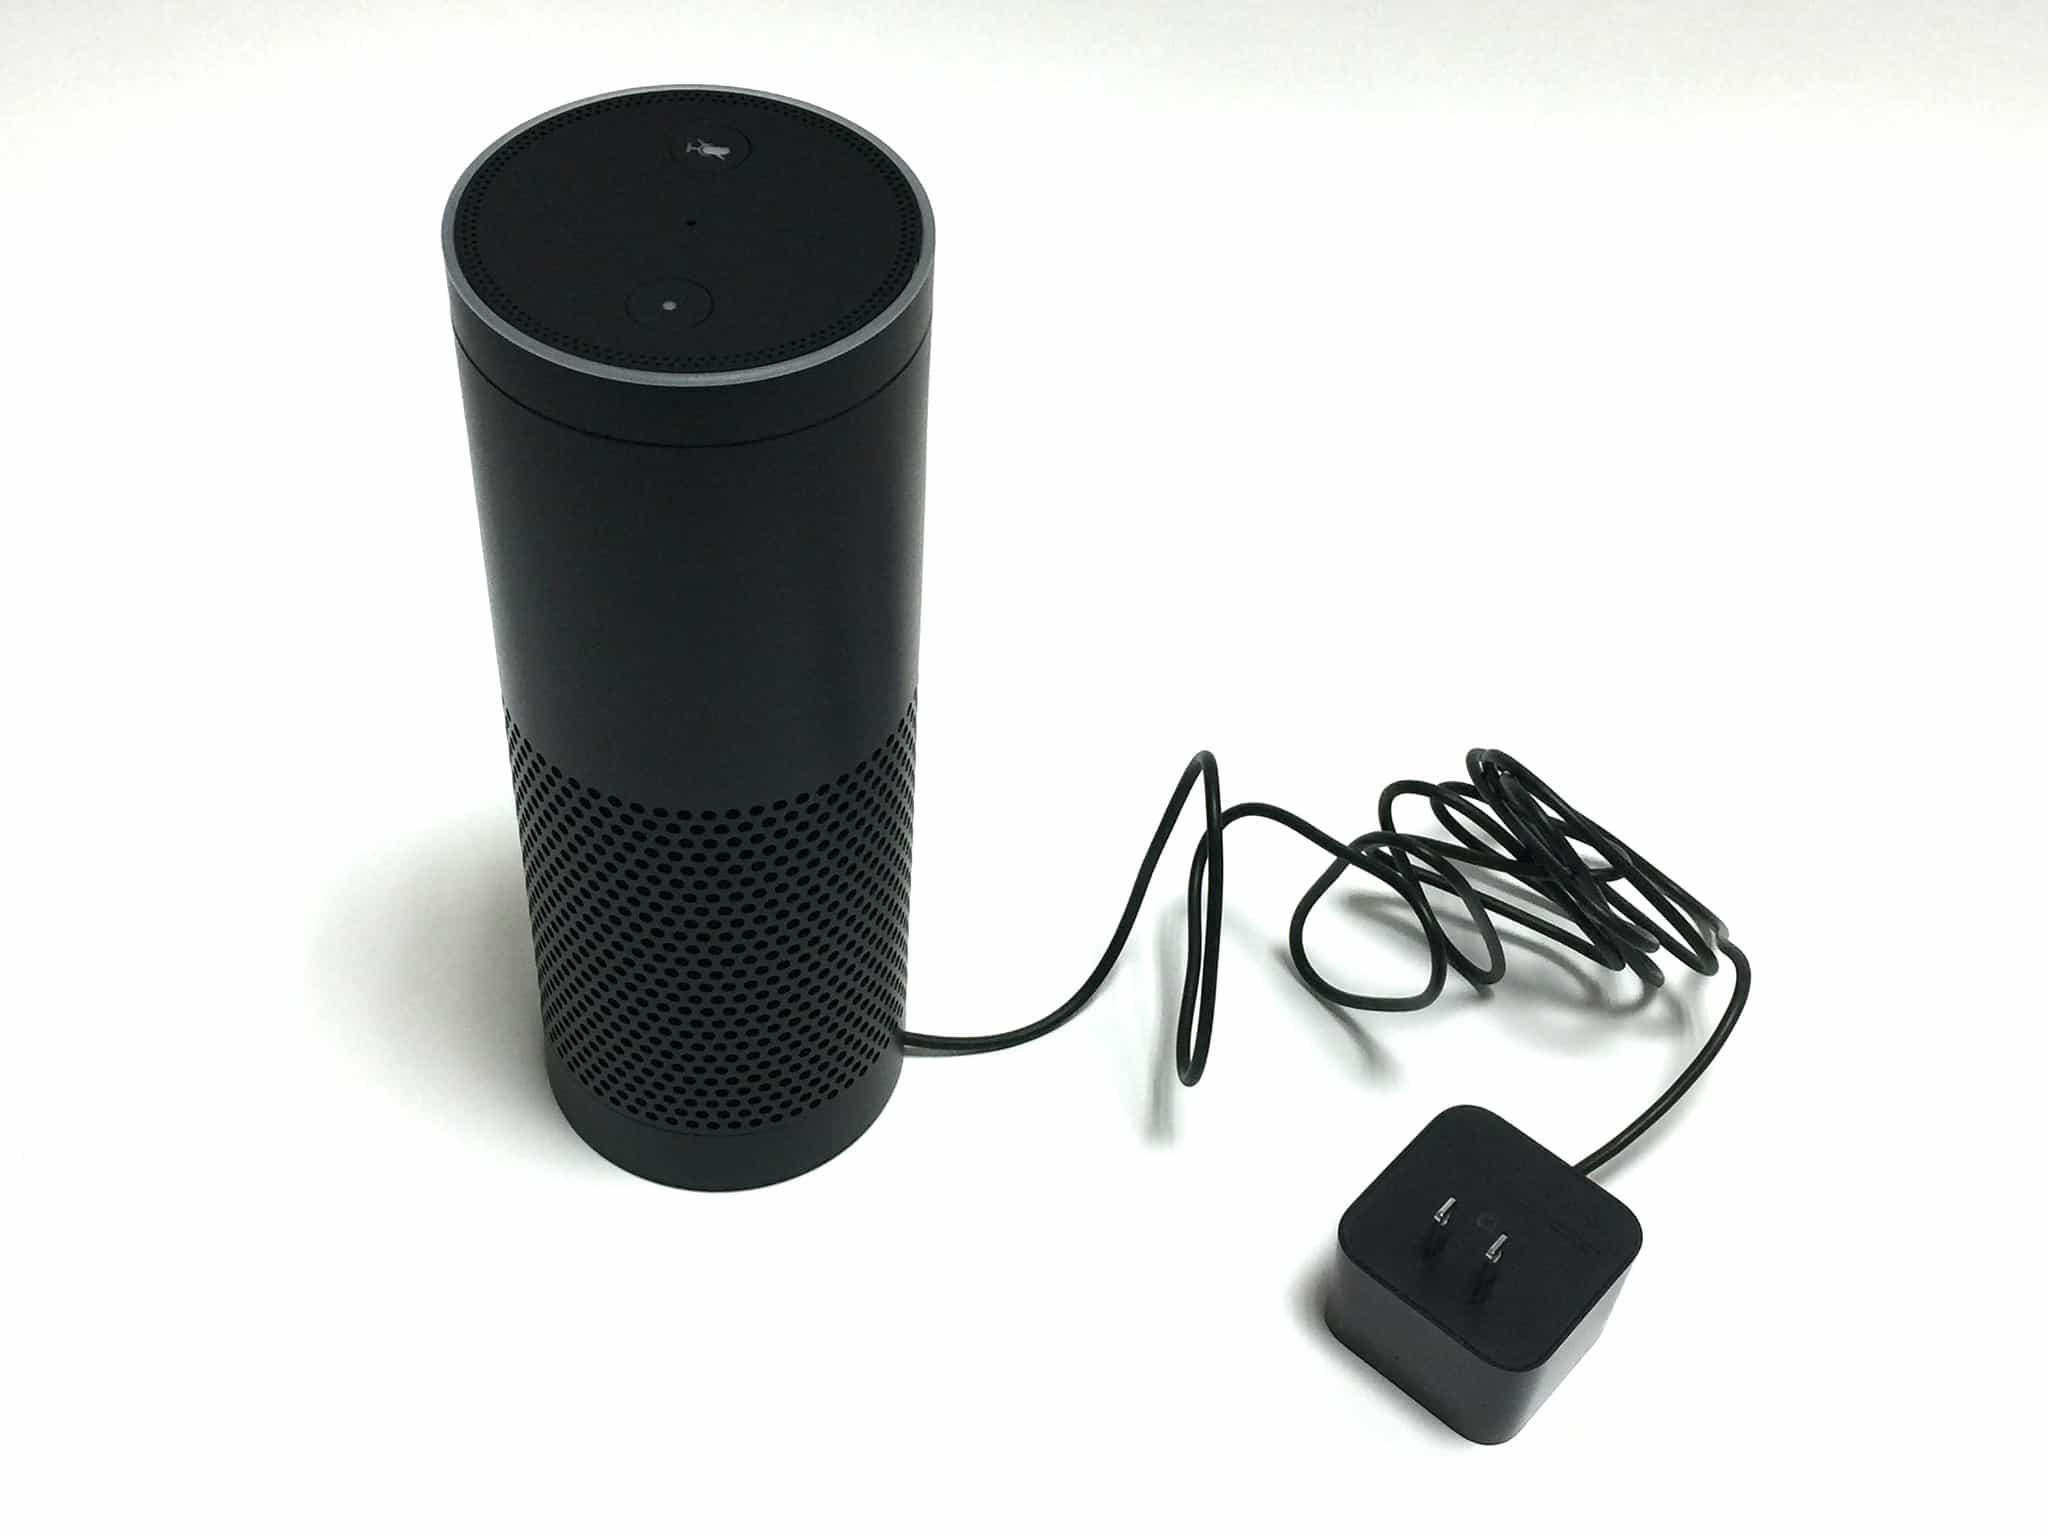 How to make your Amazon Echo or Google Home more private